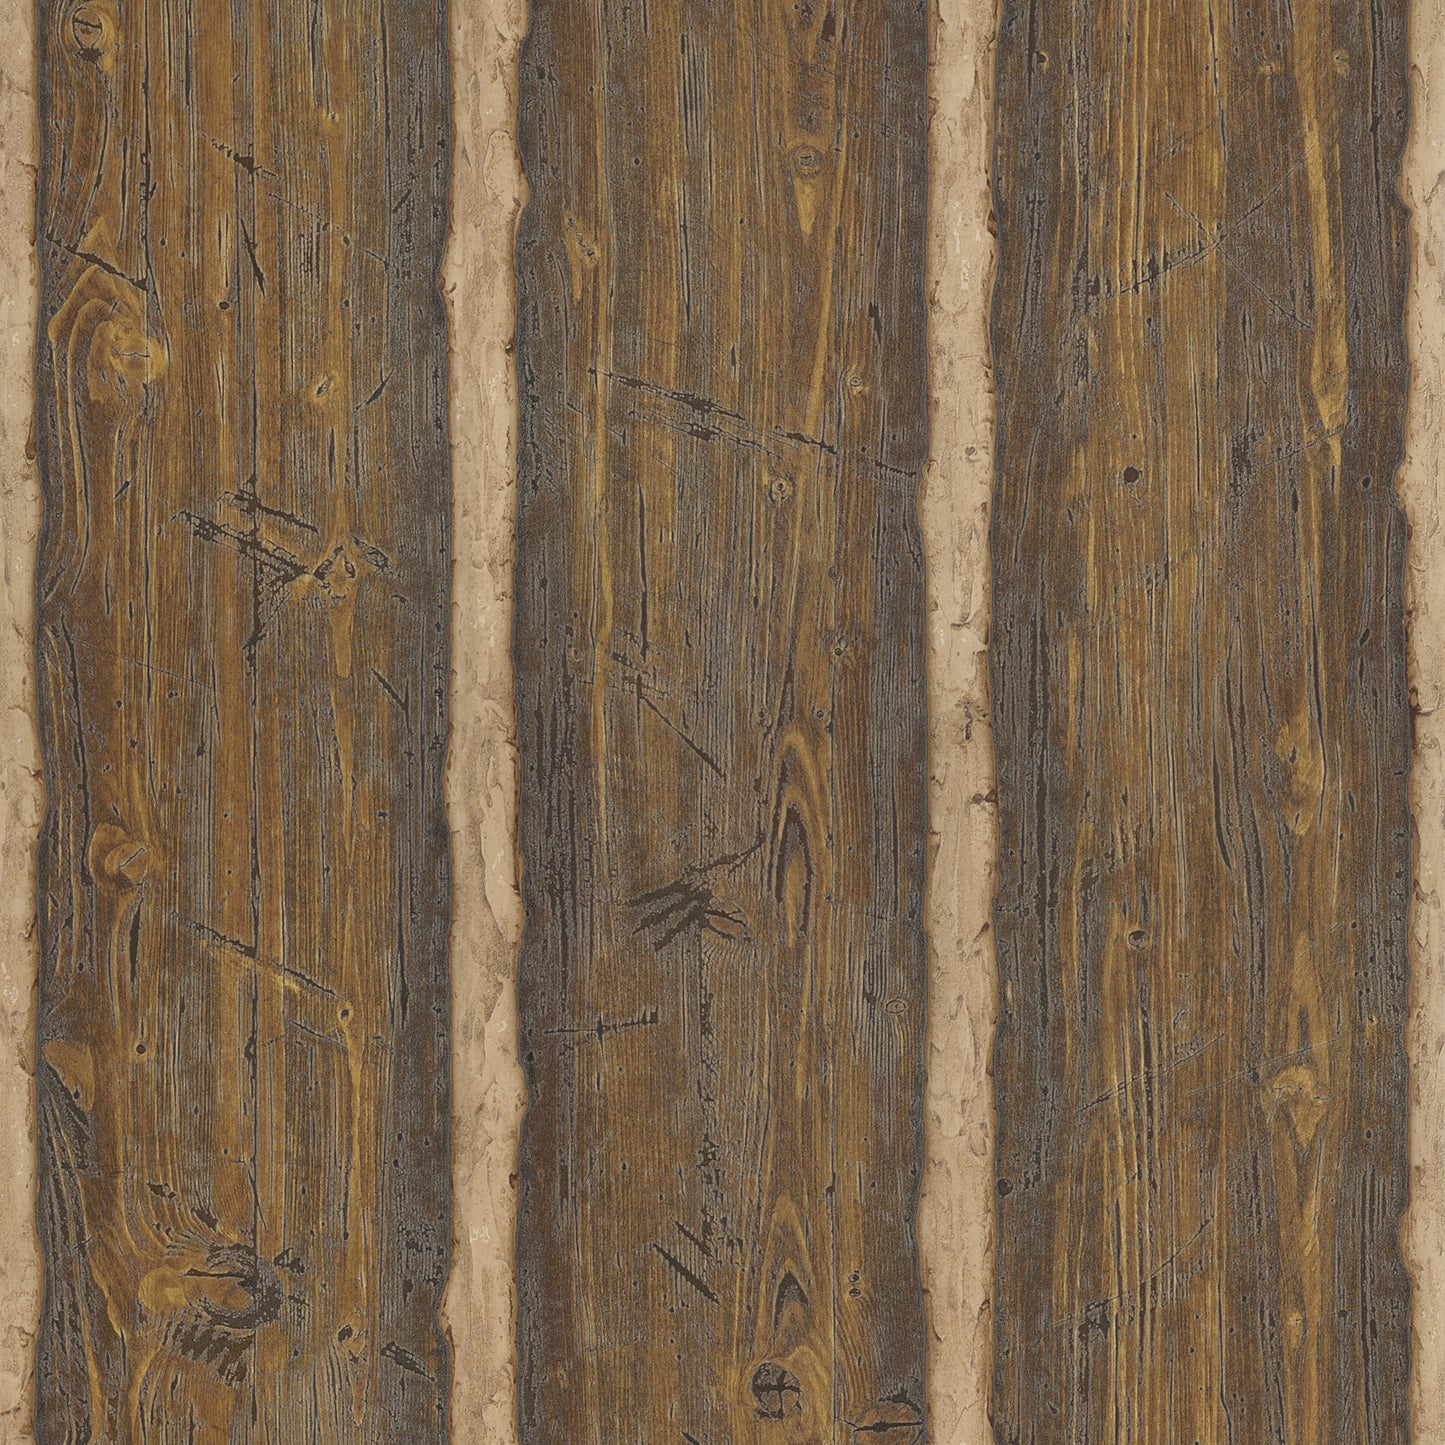 Purchase 2718-41382 Texture Trends II Log Cabin Brewster Wallpaper